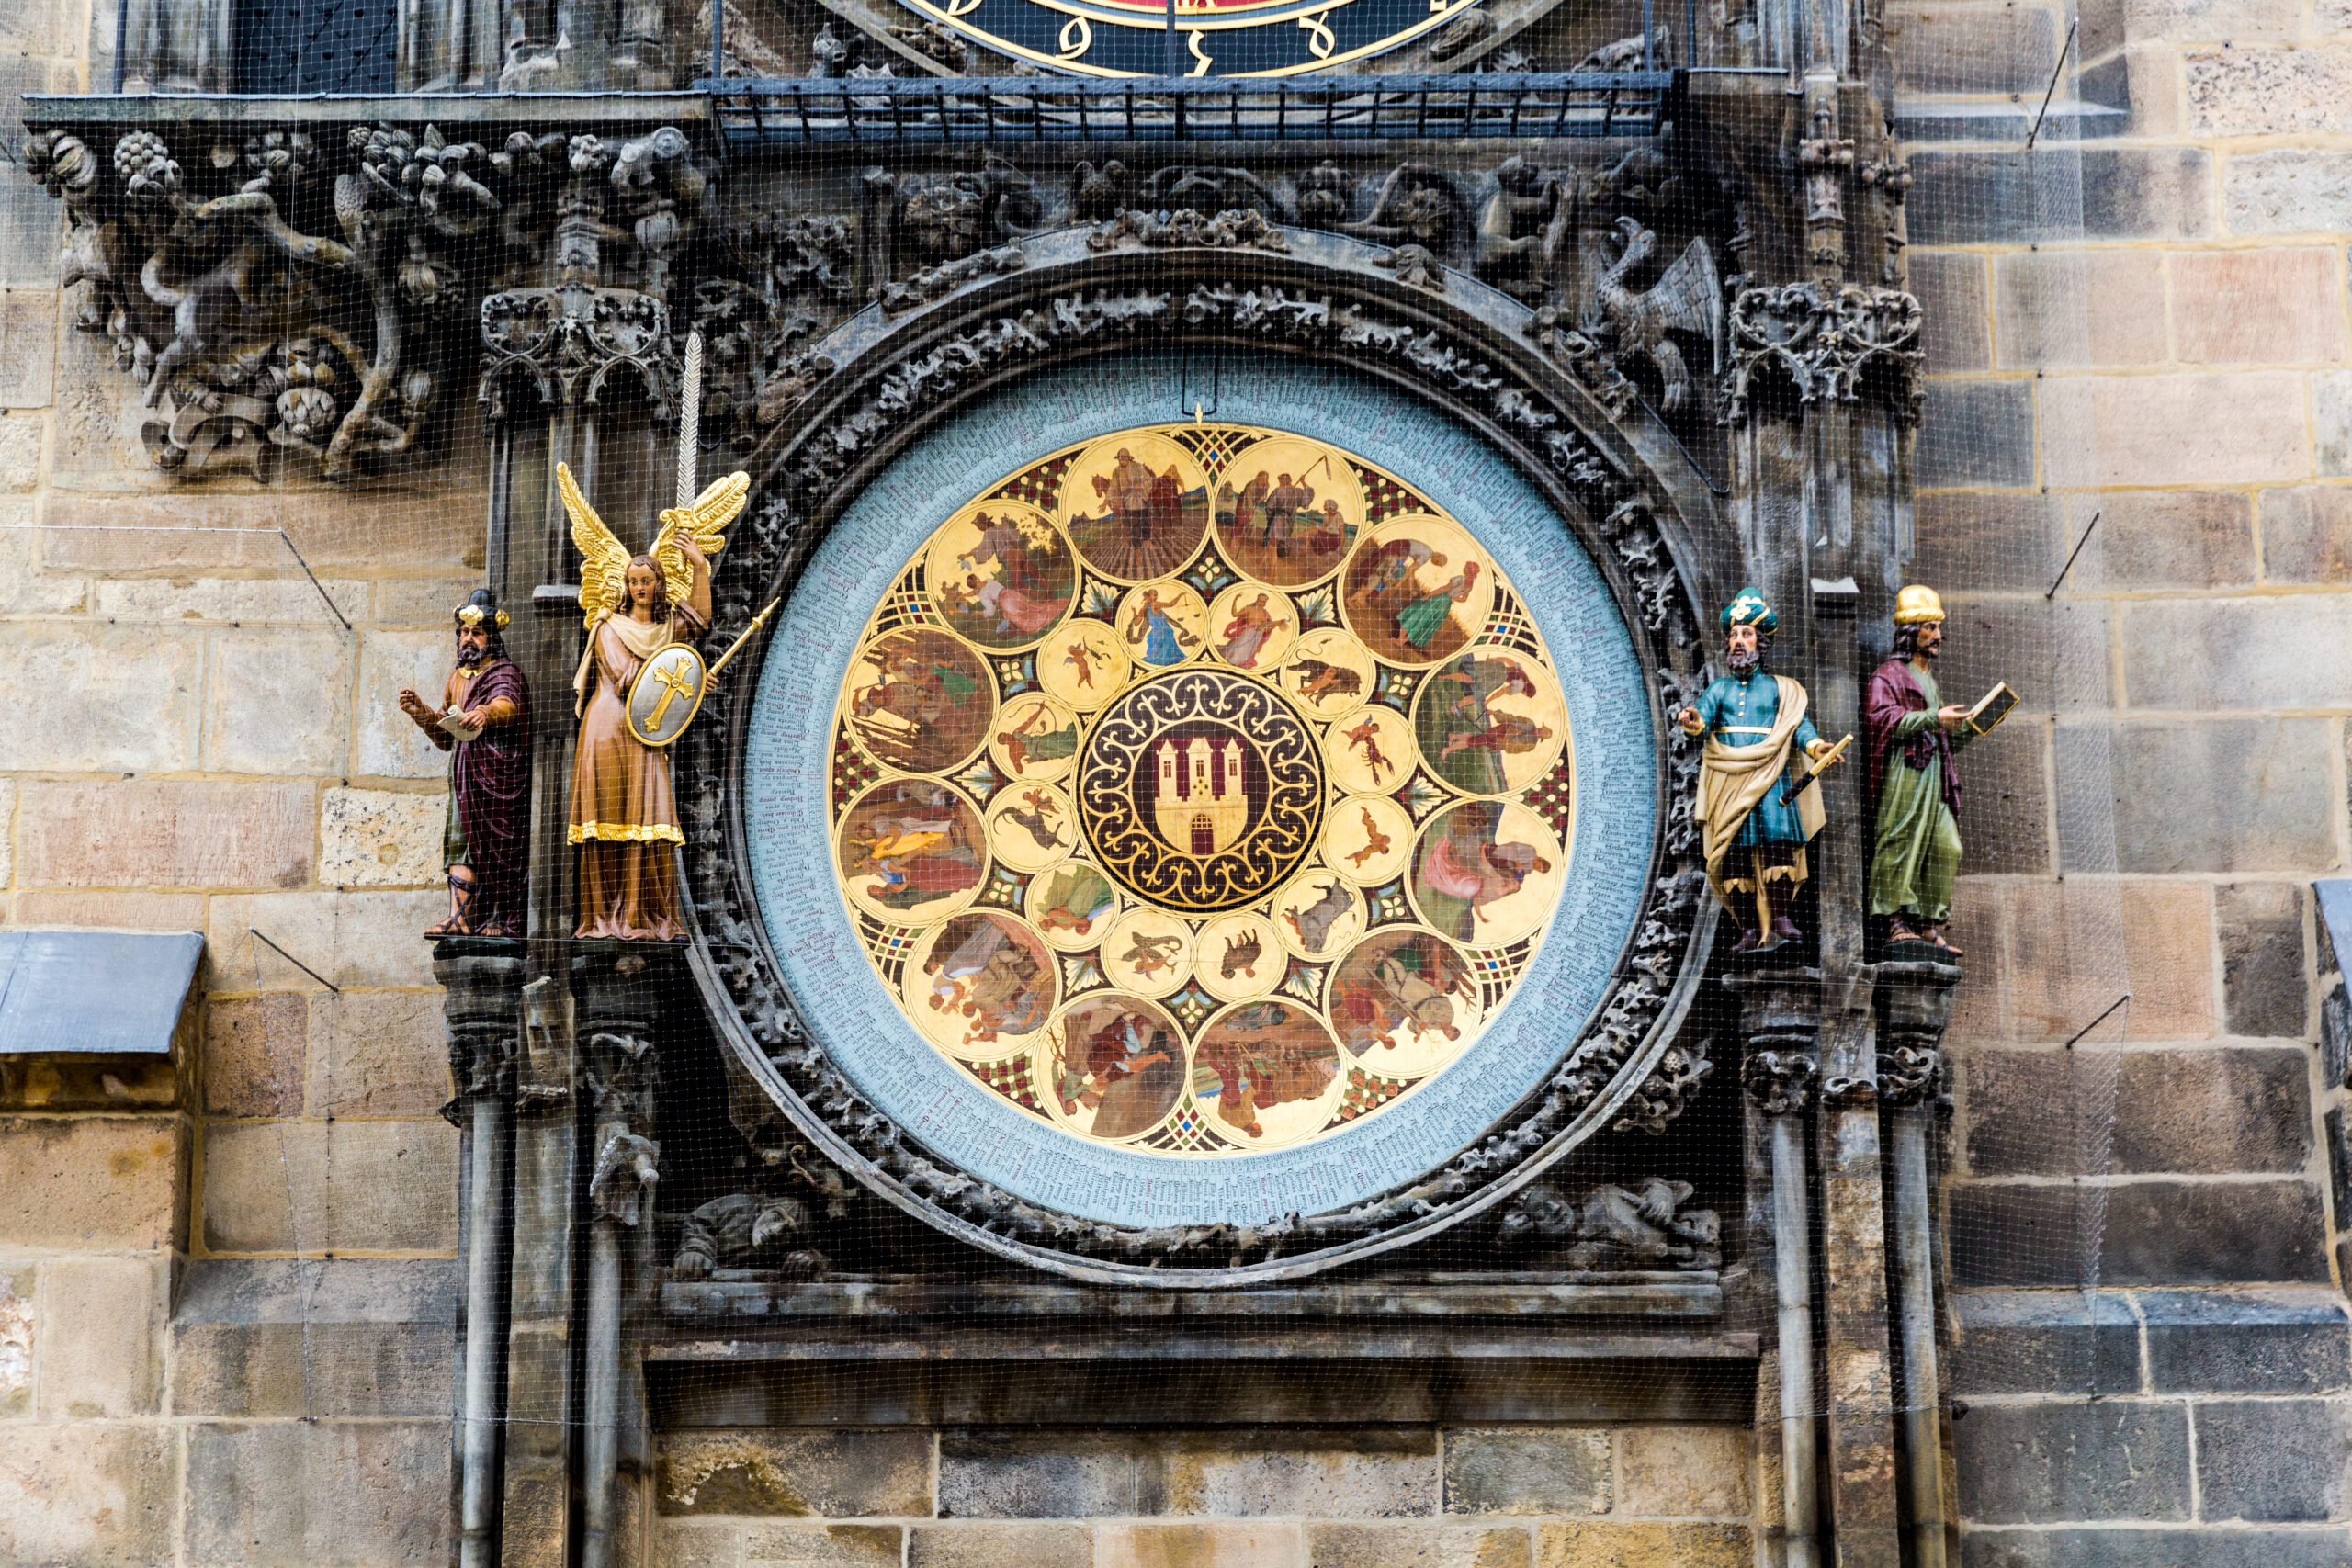 Astronomical Clock, Prague in Czech Republic (Dave G Kelly/Moment via Getty Images)